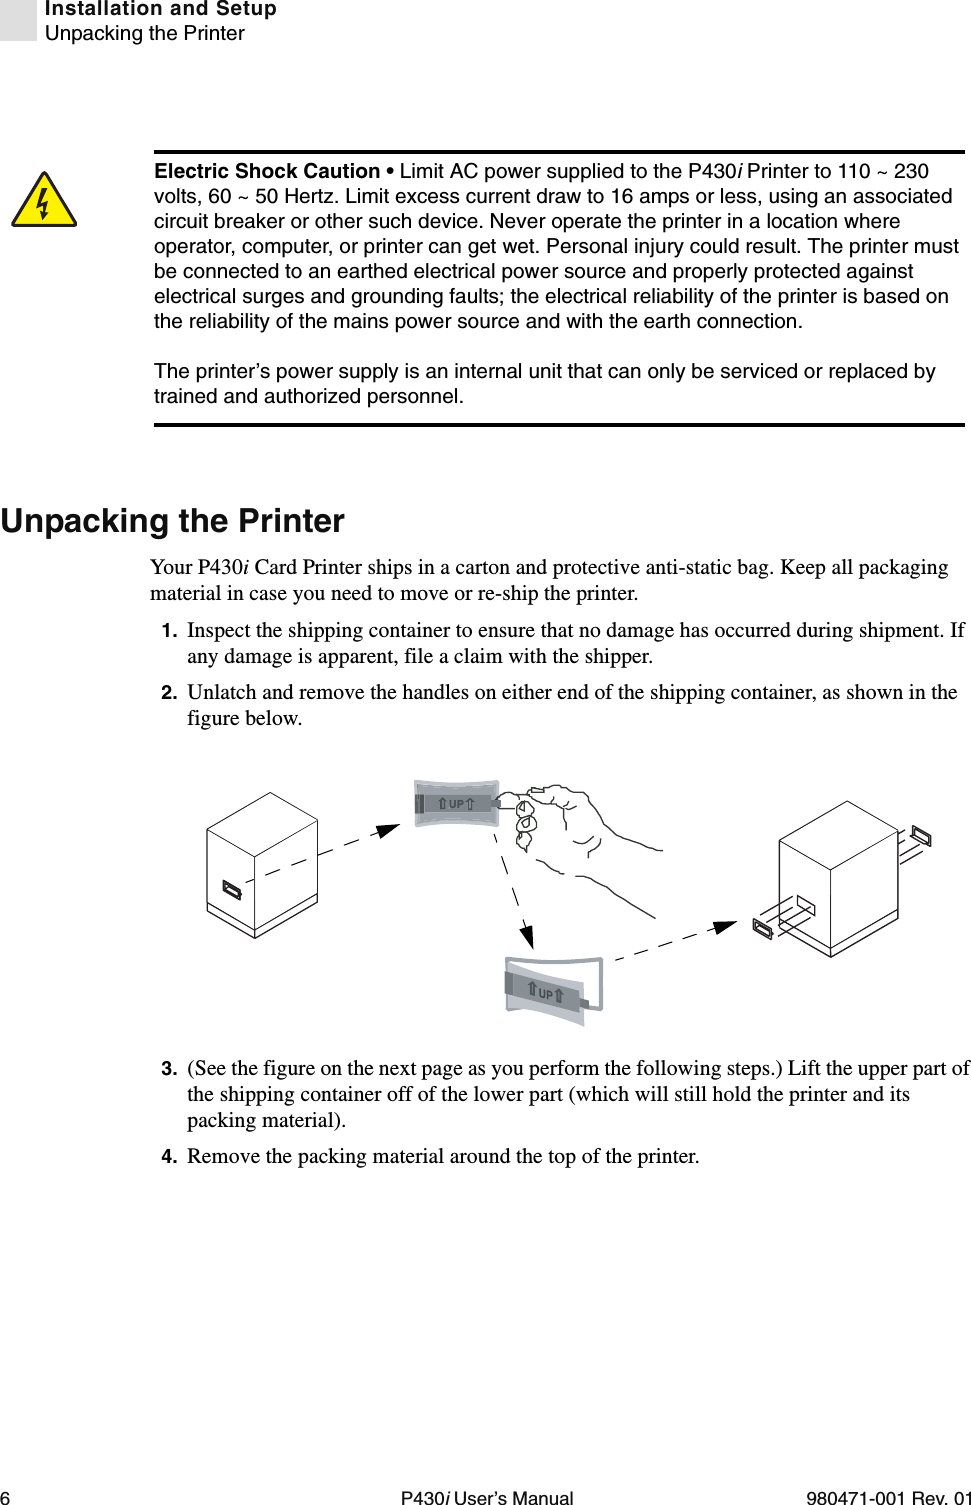 6P430i User’s Manual 980471-001 Rev. 01Installation and SetupUnpacking the PrinterUnpacking the PrinterYour P430i Card Printer ships in a carton and protective anti-static bag. Keep all packaging material in case you need to move or re-ship the printer.1. Inspect the shipping container to ensure that no damage has occurred during shipment. If any damage is apparent, file a claim with the shipper.2. Unlatch and remove the handles on either end of the shipping container, as shown in the figure below.3. (See the figure on the next page as you perform the following steps.) Lift the upper part of the shipping container off of the lower part (which will still hold the printer and its packing material).4. Remove the packing material around the top of the printer.Electric Shock Caution • Limit AC power supplied to the P430i Printer to 110 ~ 230 volts, 60 ~ 50 Hertz. Limit excess current draw to 16 amps or less, using an associated circuit breaker or other such device. Never operate the printer in a location where operator, computer, or printer can get wet. Personal injury could result. The printer must be connected to an earthed electrical power source and properly protected against electrical surges and grounding faults; the electrical reliability of the printer is based on the reliability of the mains power source and with the earth connection.The printer’s power supply is an internal unit that can only be serviced or replaced by trained and authorized personnel.UP